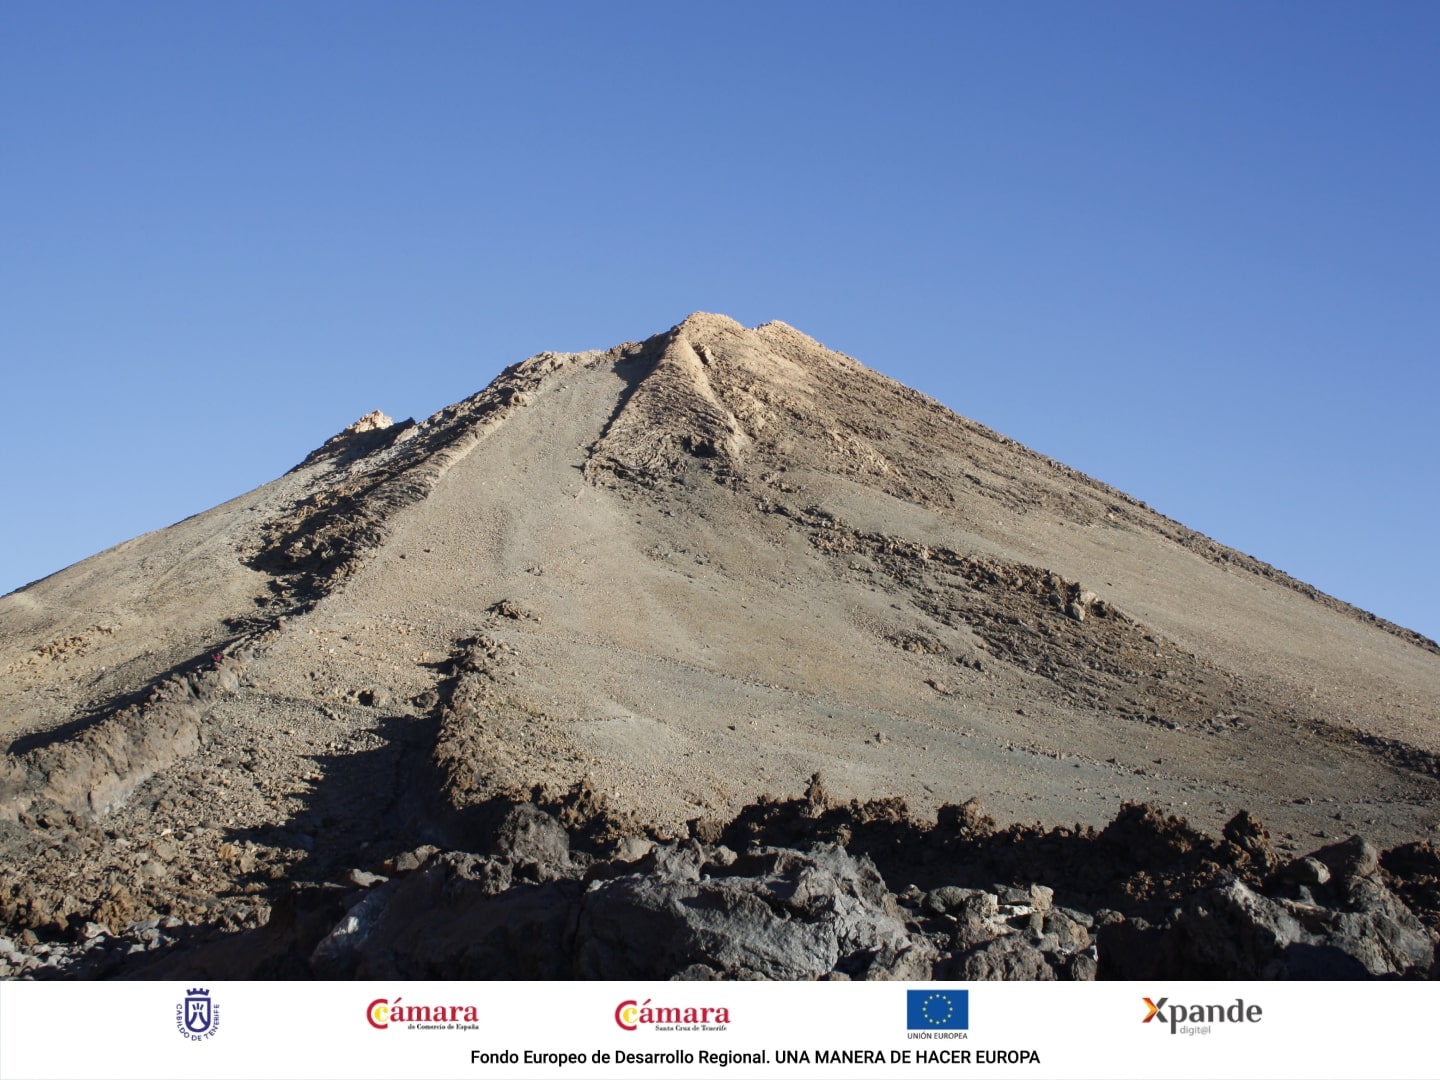 to climb to the peak of Teide: permit and to get there Canarias Nature Guides